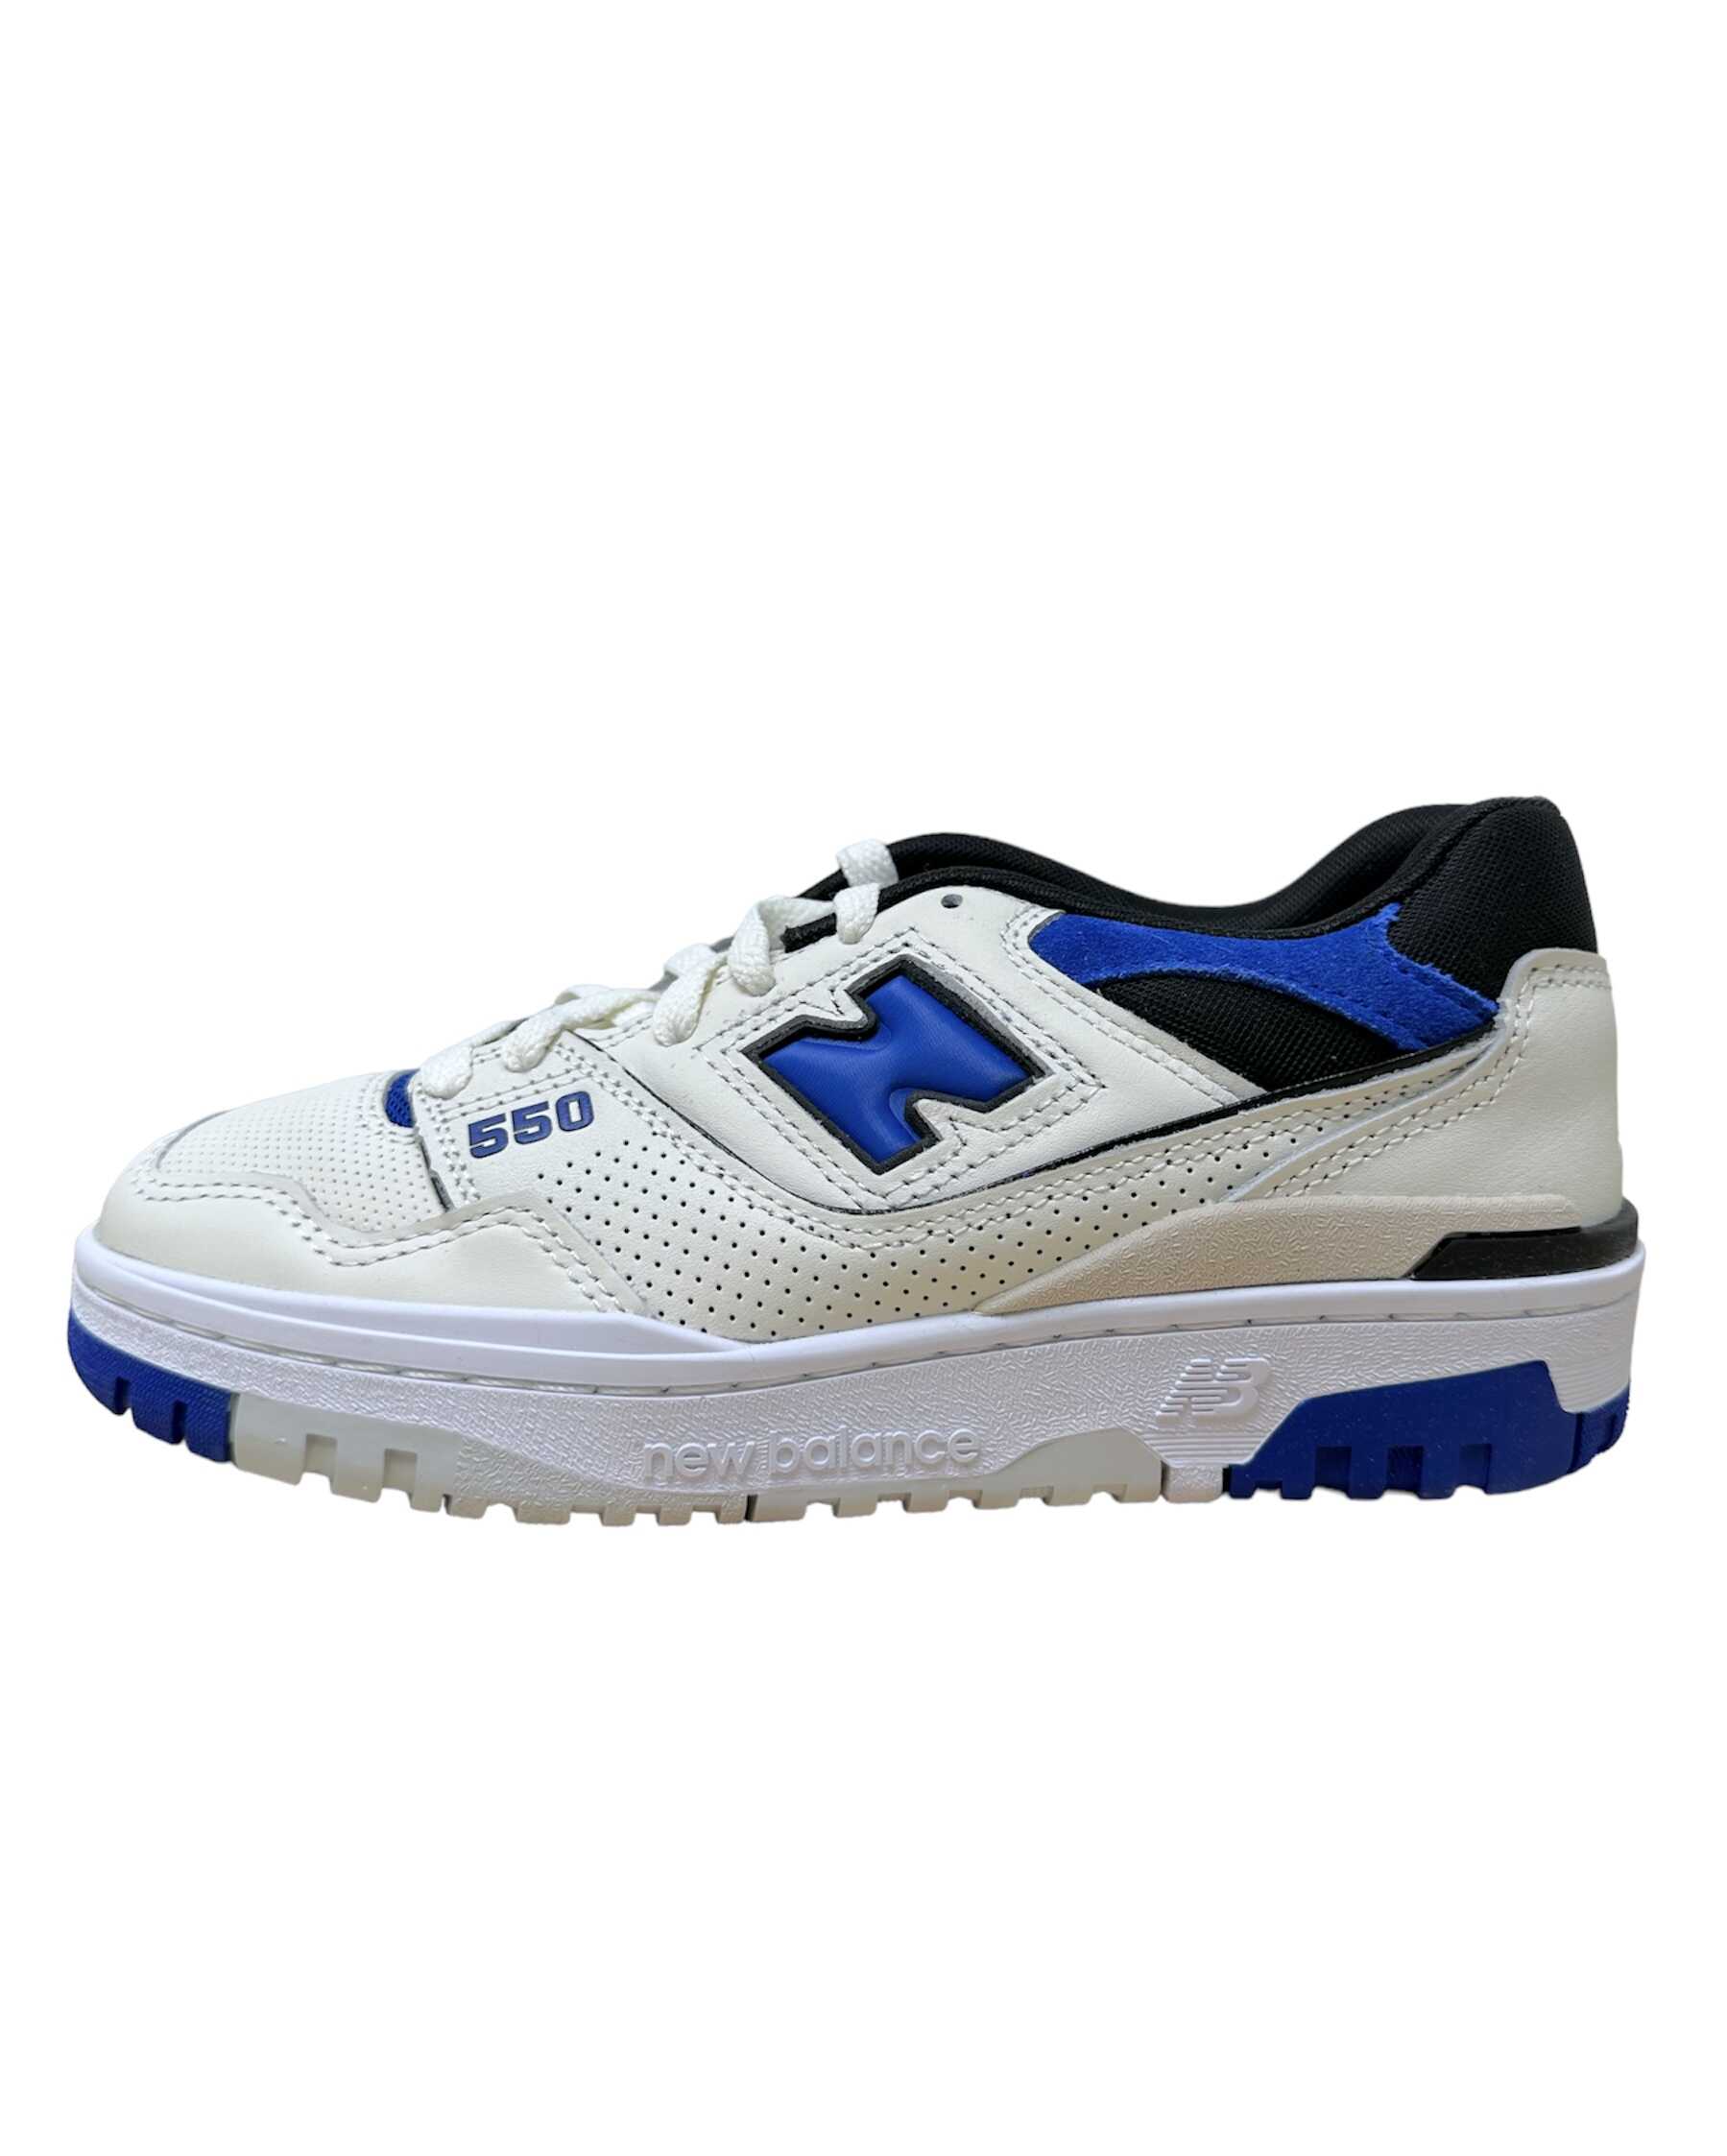 New Balance 550 White Blue Sneakers - Genuine Design Luxury Consignment for Men. New & Pre-Owned Clothing, Shoes, & Accessories. Calgary, Canada